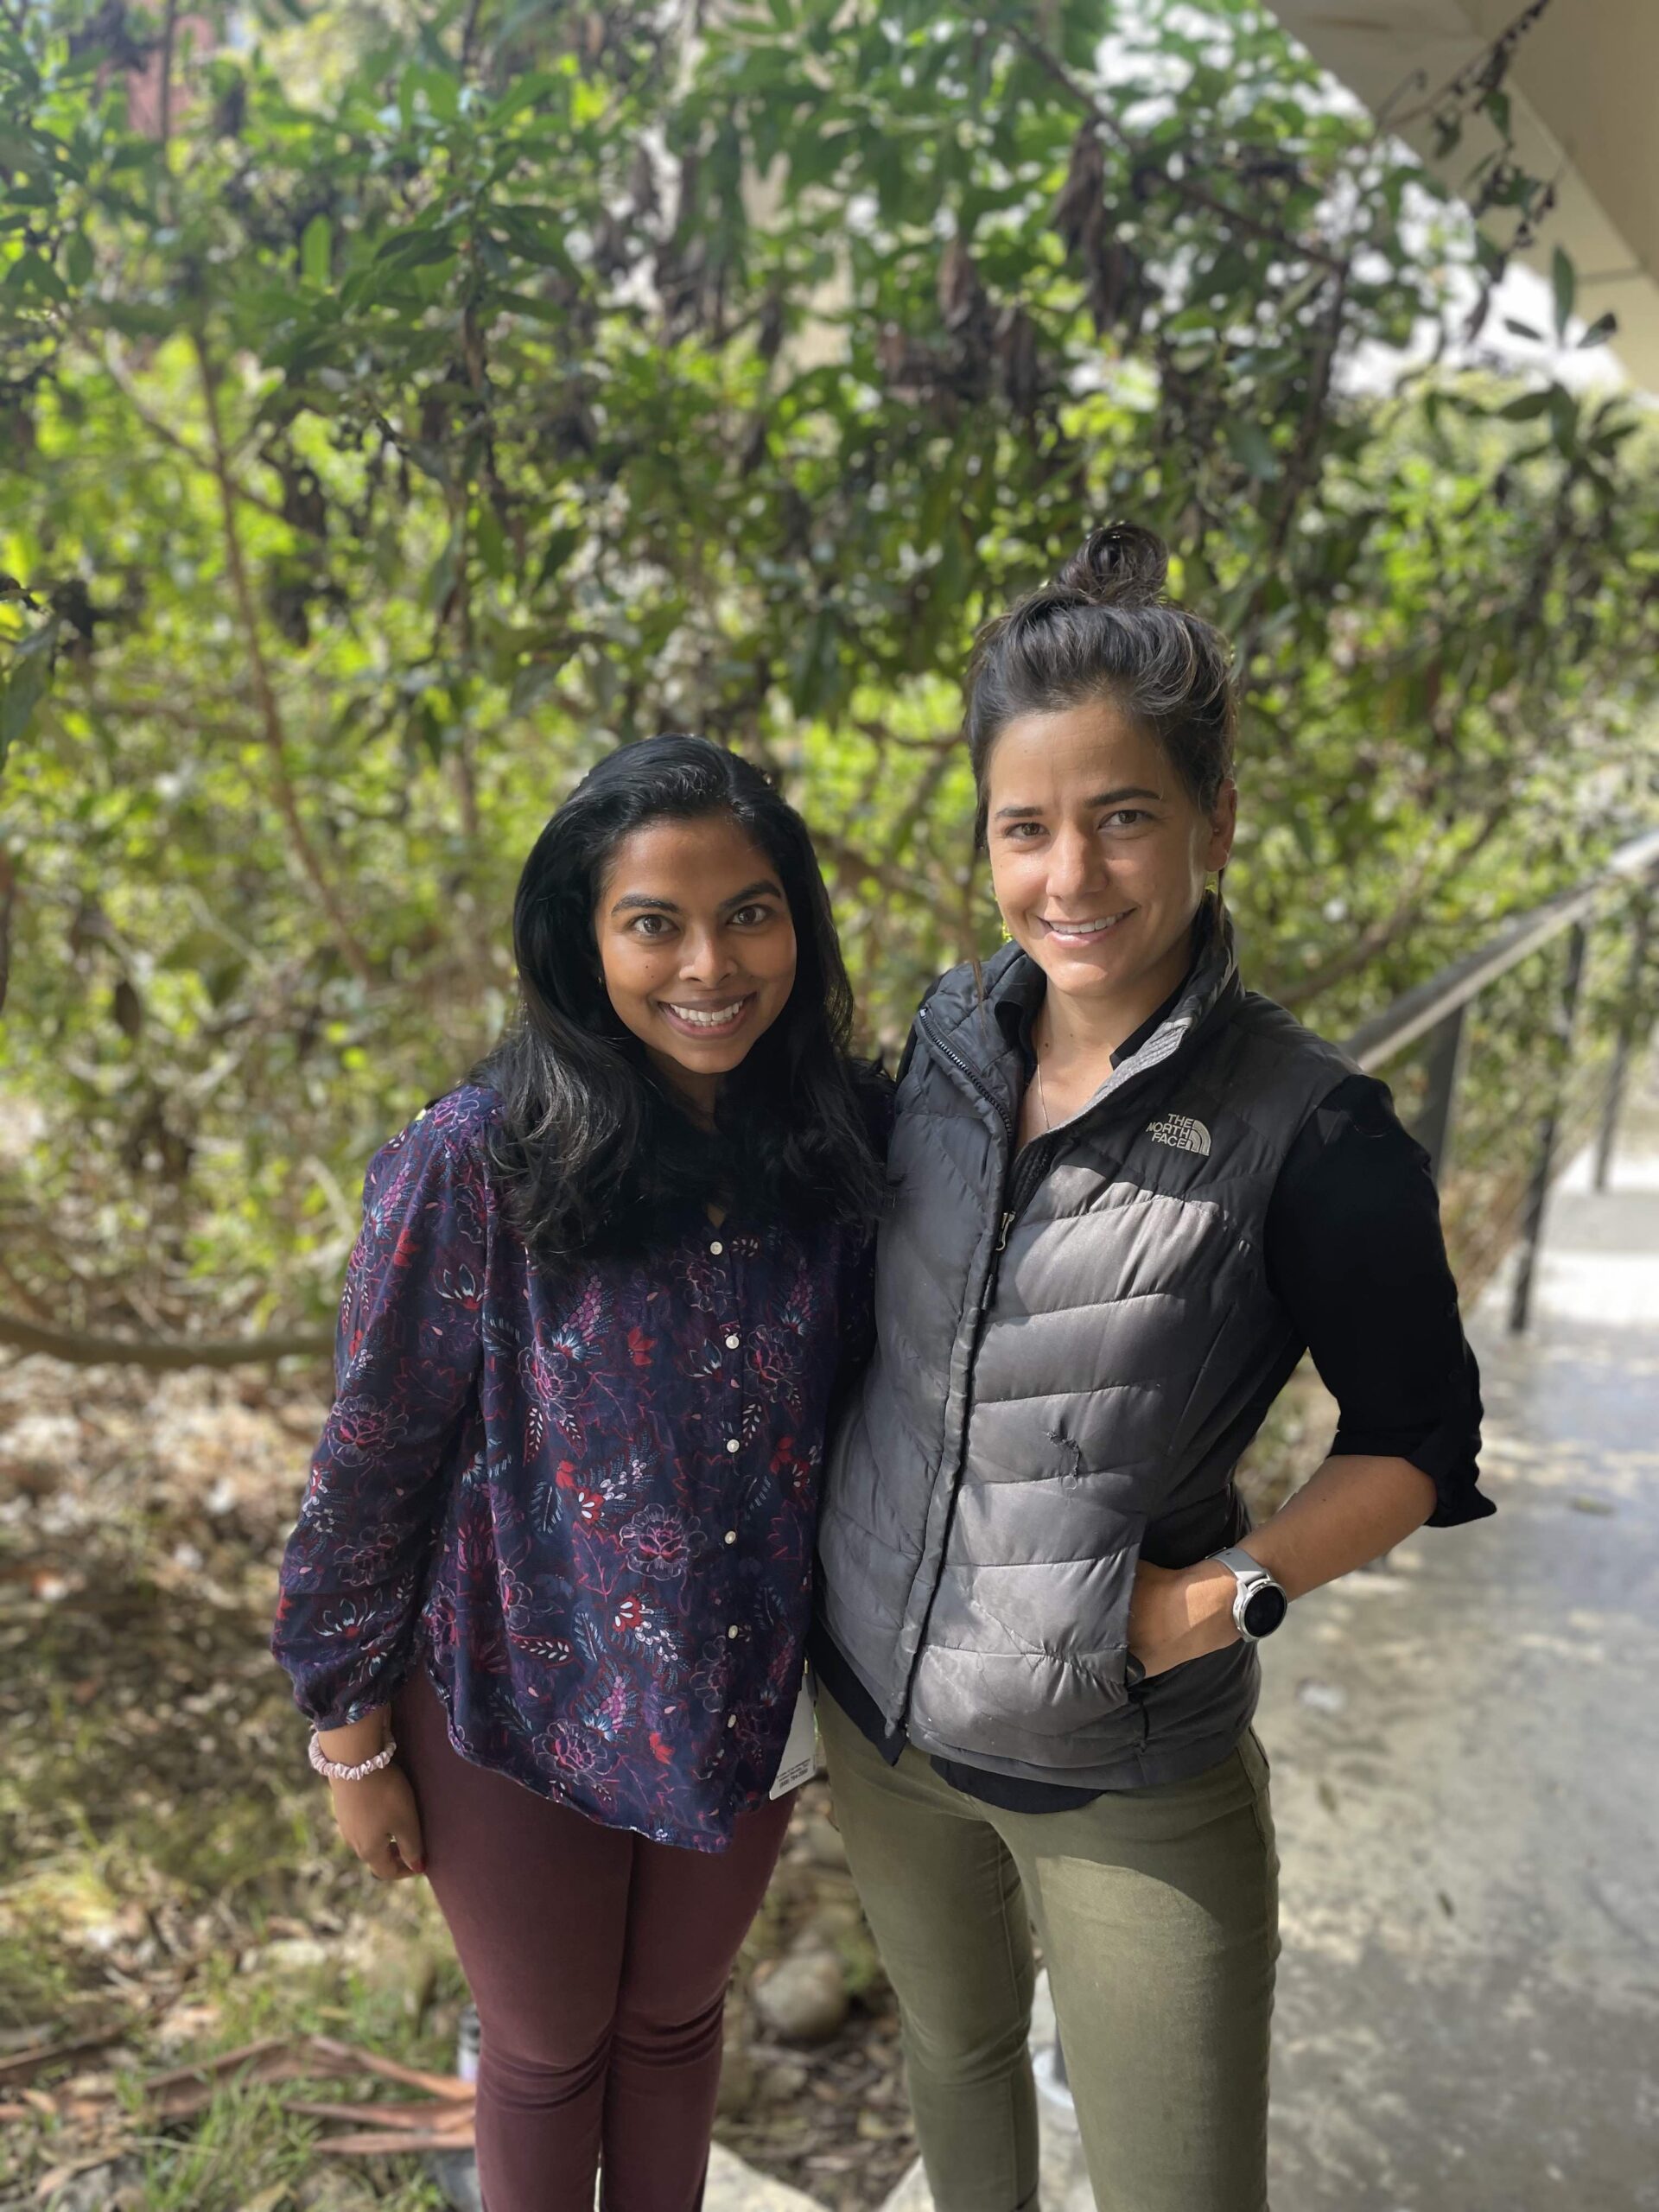 Jyothi Purushotham and Holly Lutz recognized for early career accomplishments